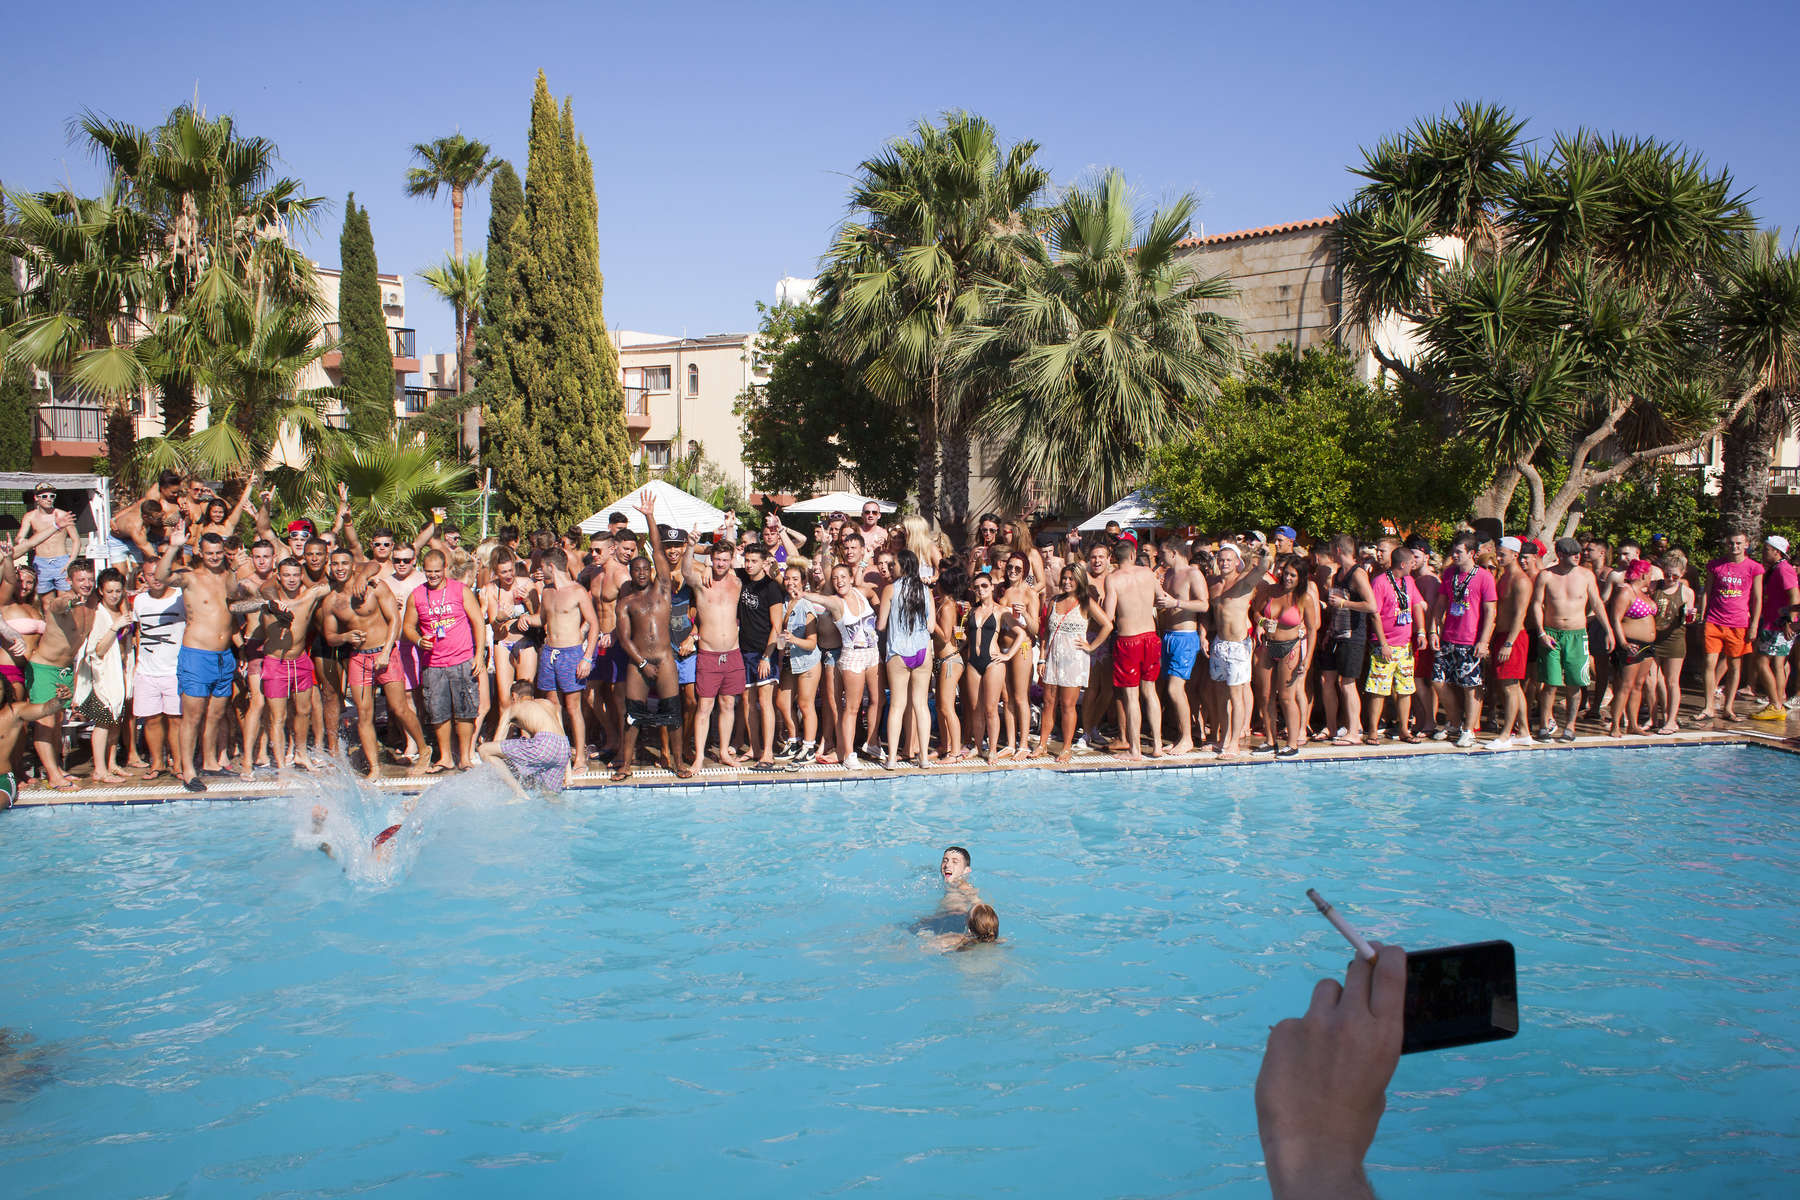 16:43 British seasonal workers and tourists in Ayia Napa, Cyprus, pose for a group photograph by the outside pool, during an afternoon pool party at Club Aqua.